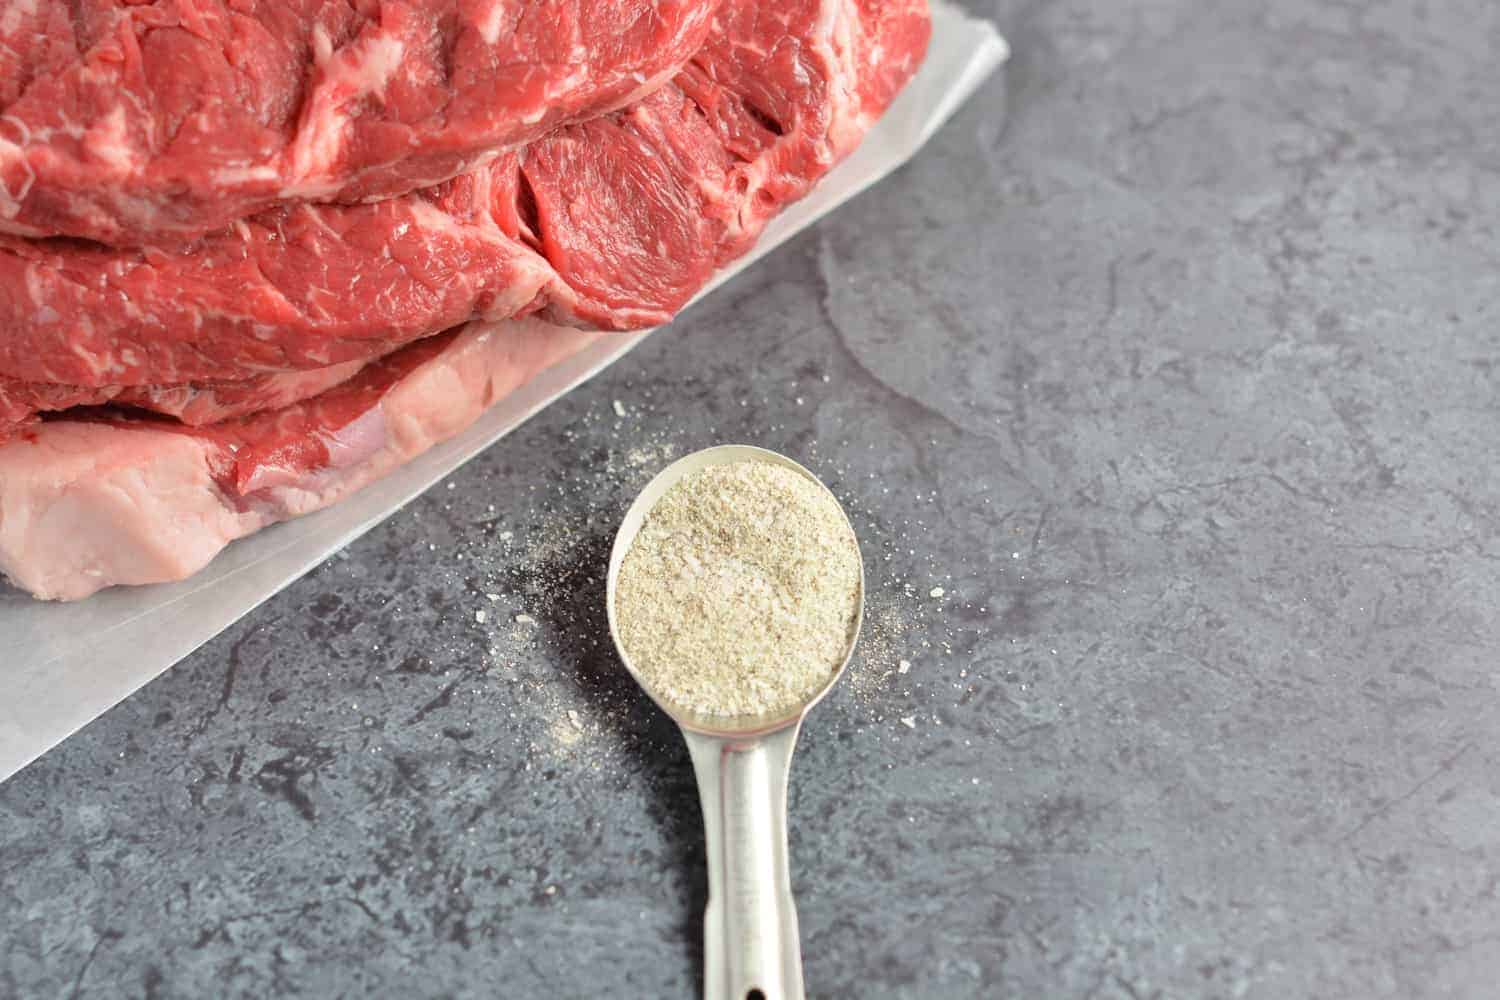 The BEST Steakhouse Steak Rub- 8 simple ingredients that all of the high end steakhouses use on steak, chicken and fish. Make a large batch and keep it in your pantry. This is the only steak seasoning you will ever need.